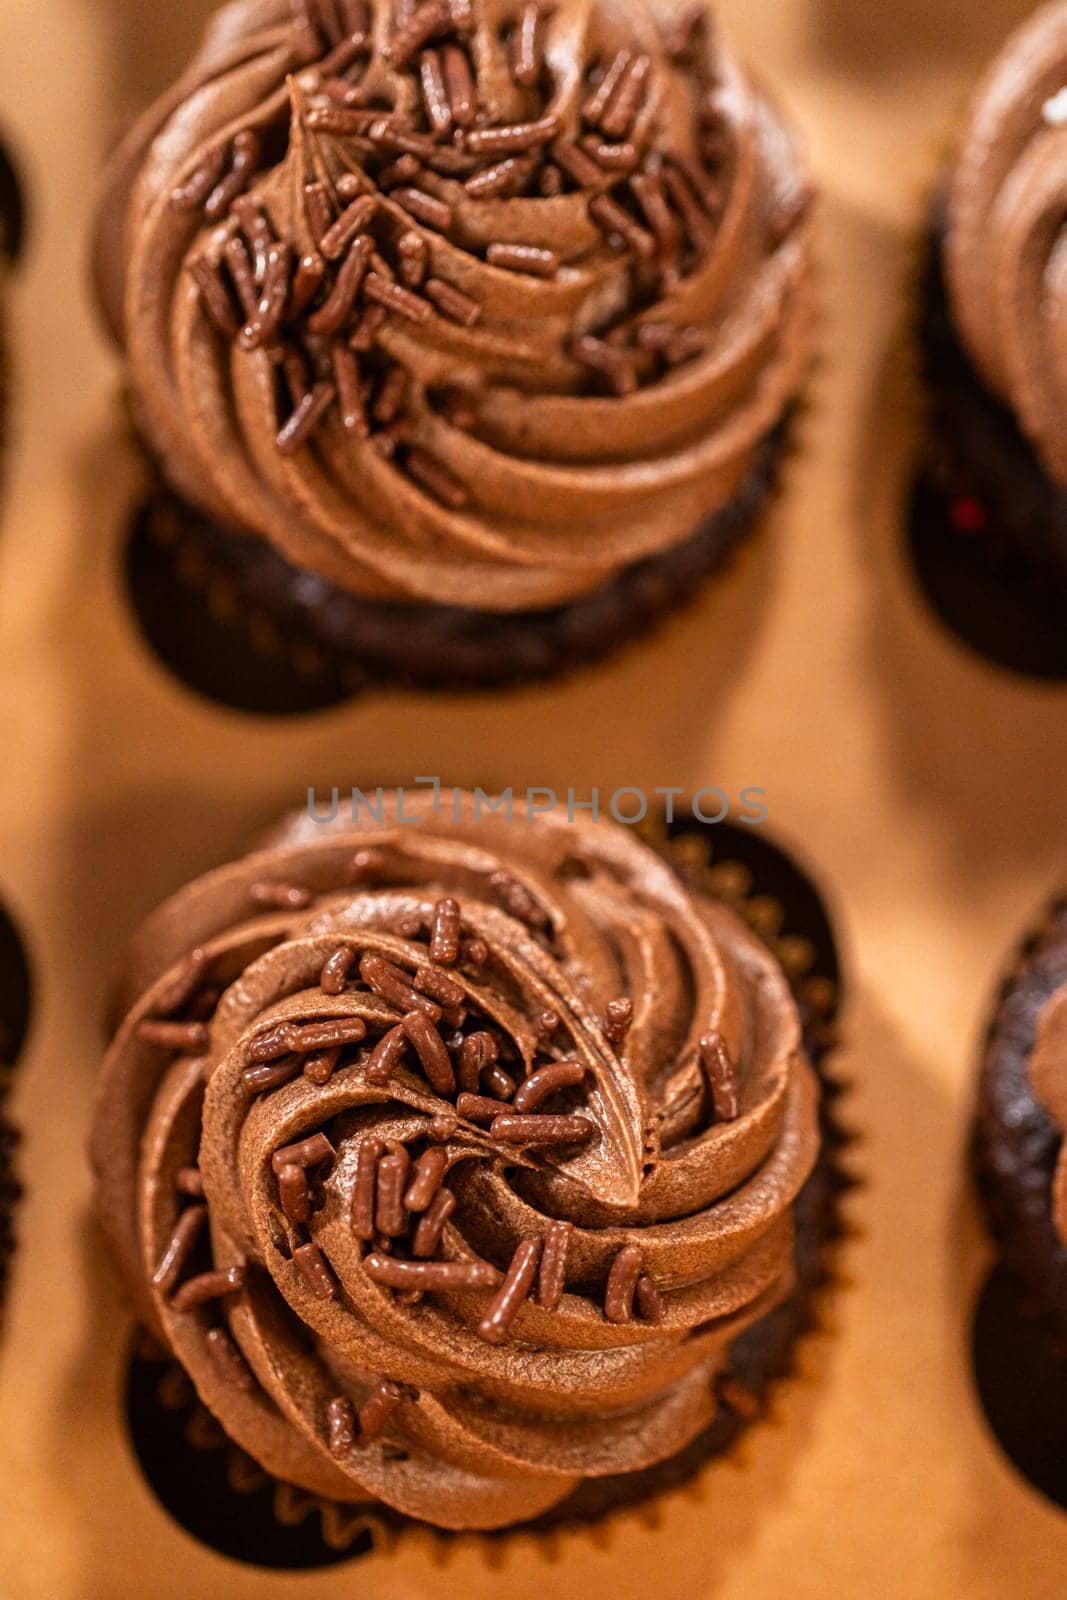 Baking Chocolate Cupcakes with Decadent Chocolate Frosting by arinahabich